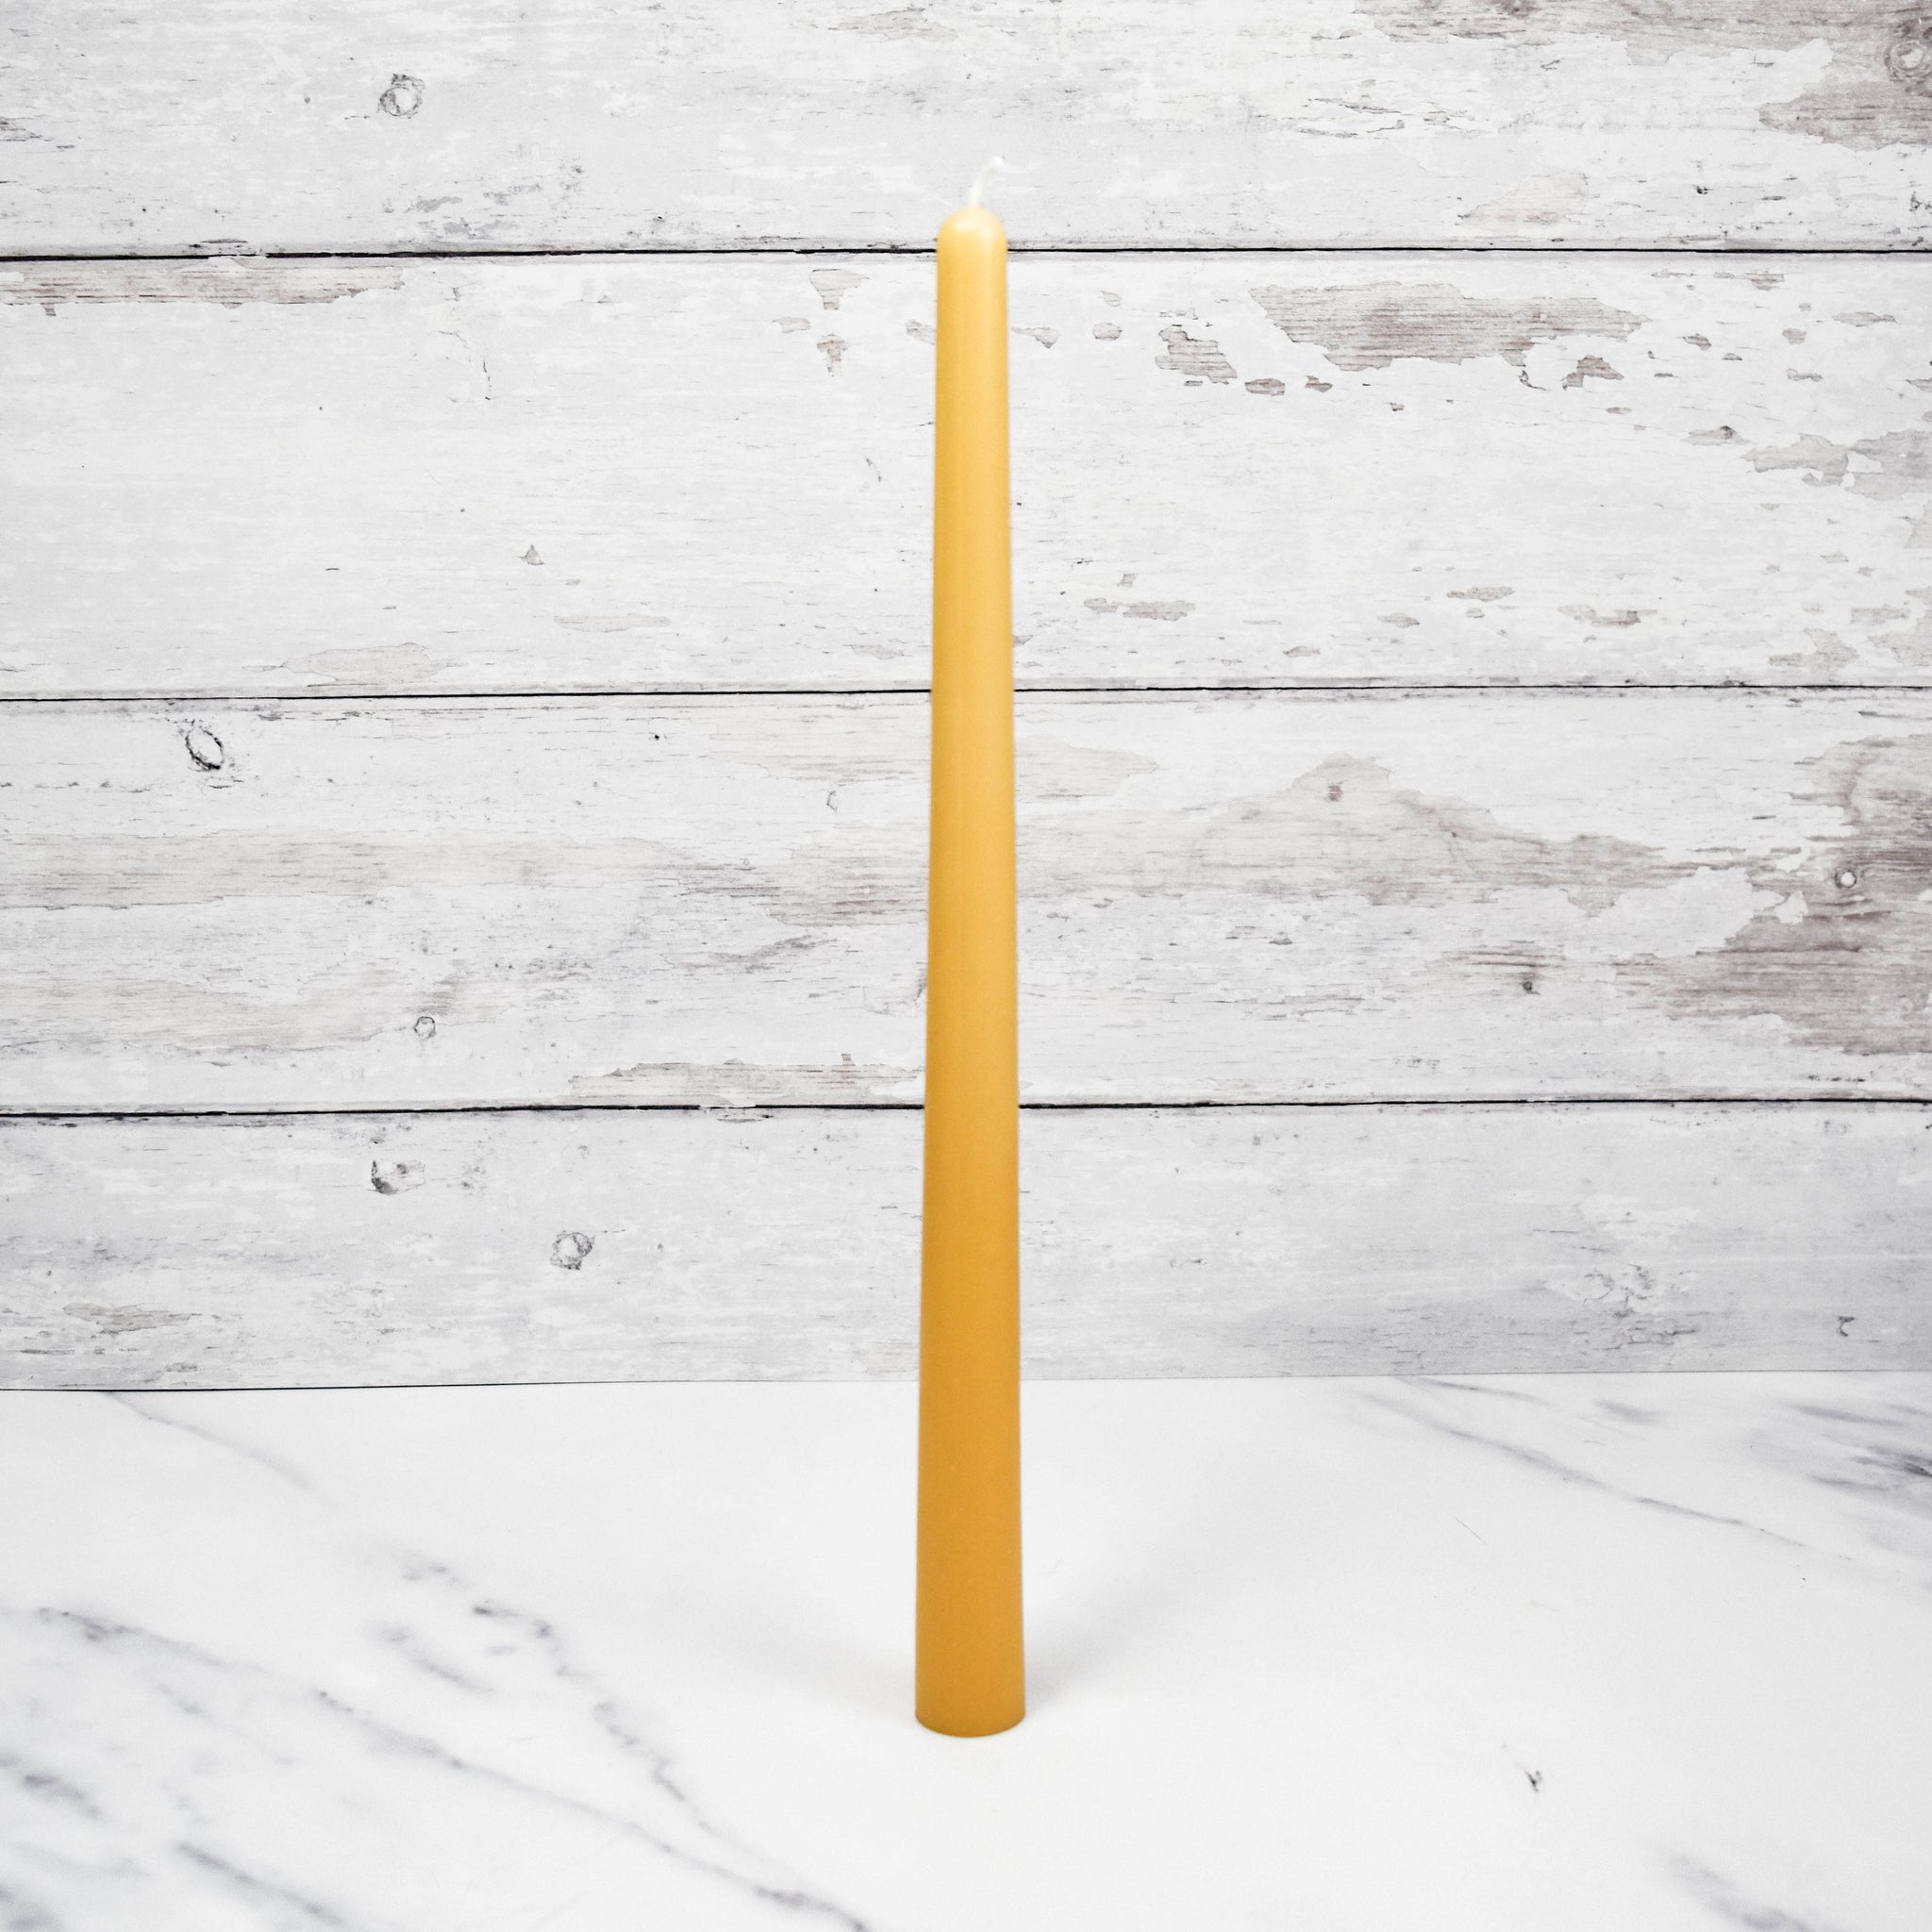 Honey Candles - 12" Natural Taper Beeswax Candles